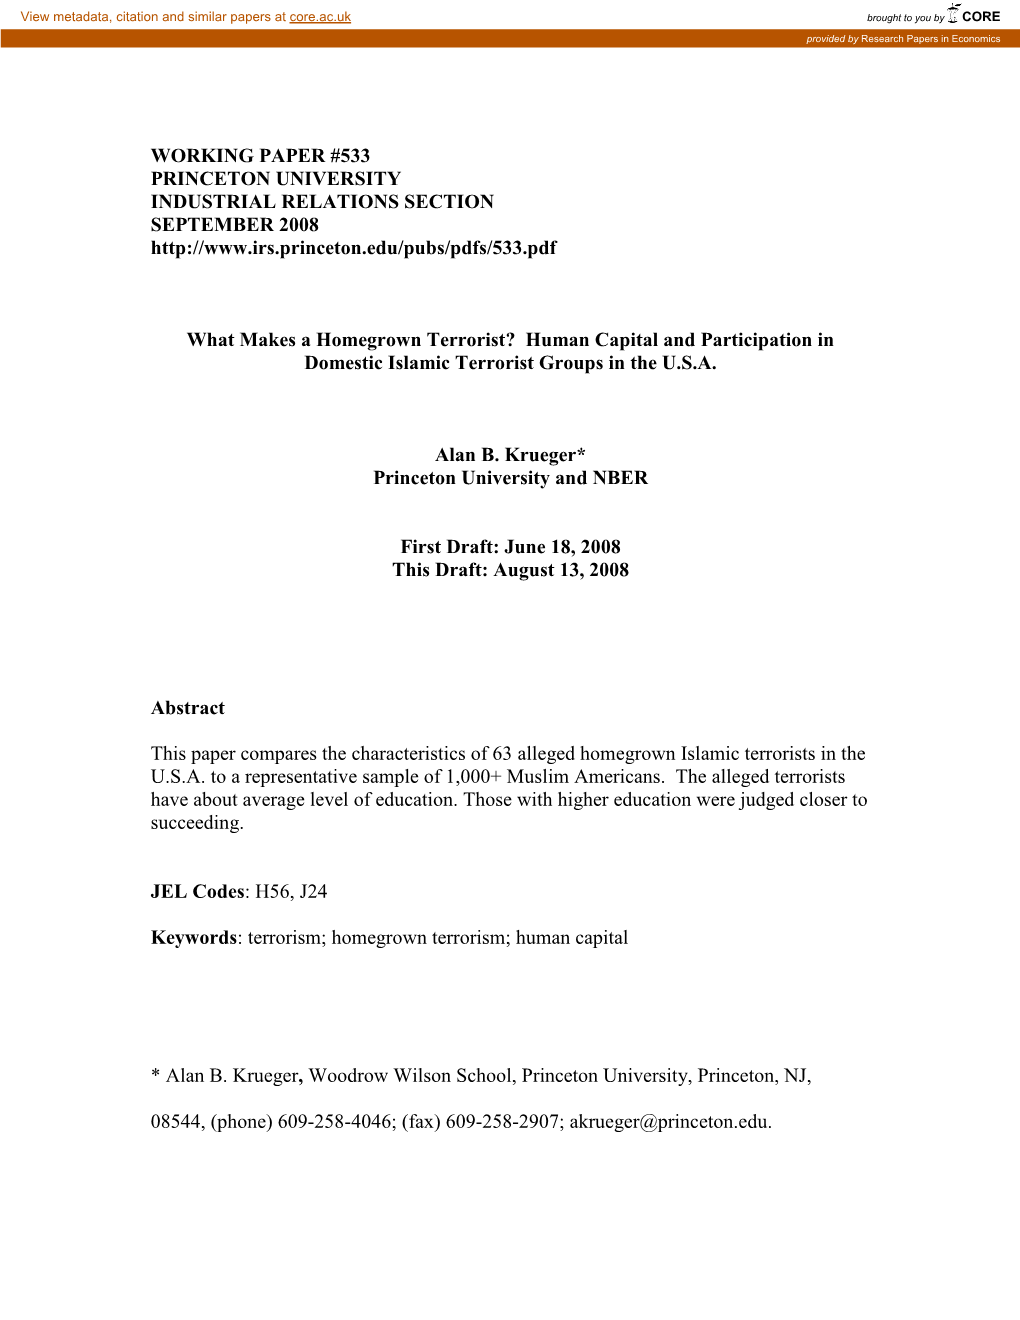 Working Paper #533 Princeton University Industrial Relations Section September 2008